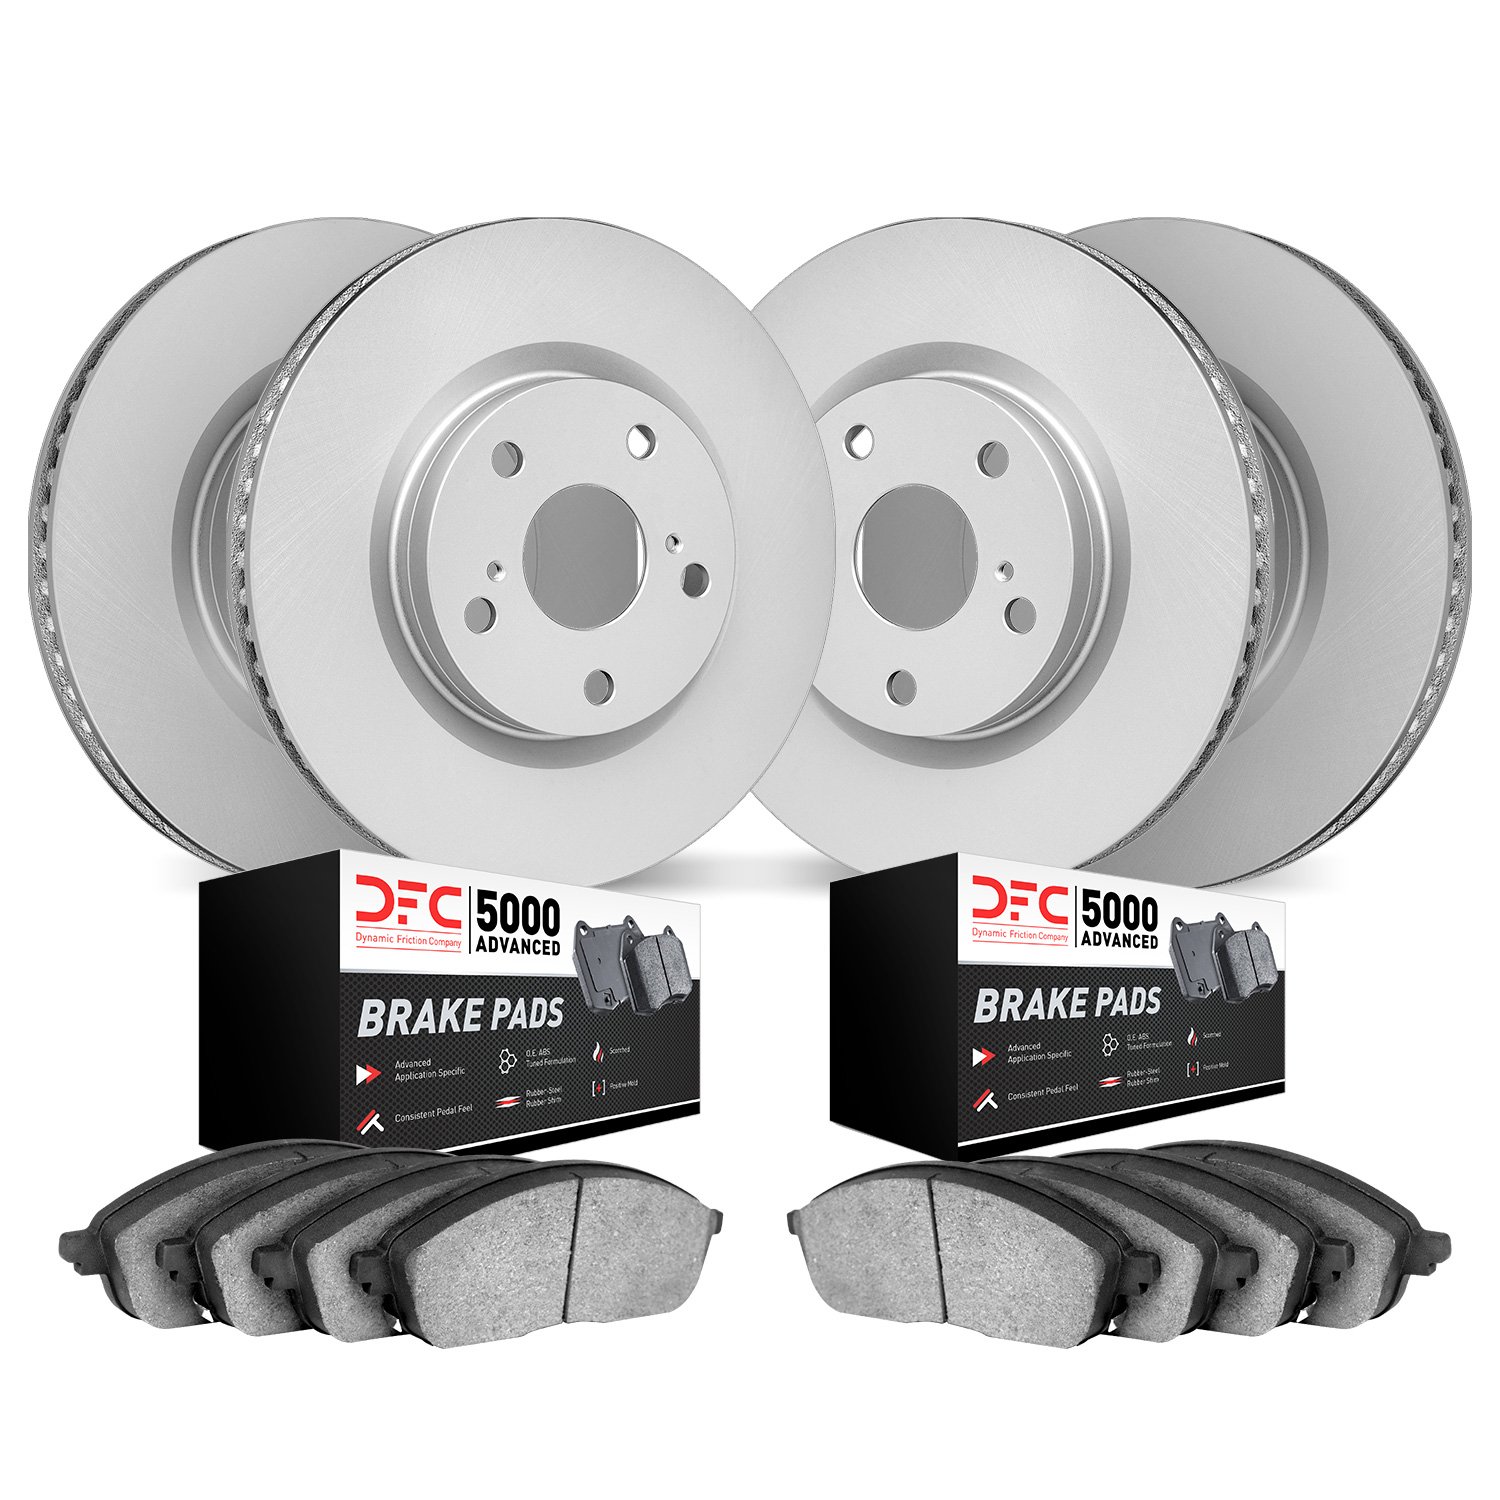 4504-65006 Geospec Brake Rotors w/5000 Advanced Brake Pads Kit, 2004-2011 GM, Position: Front and Rear